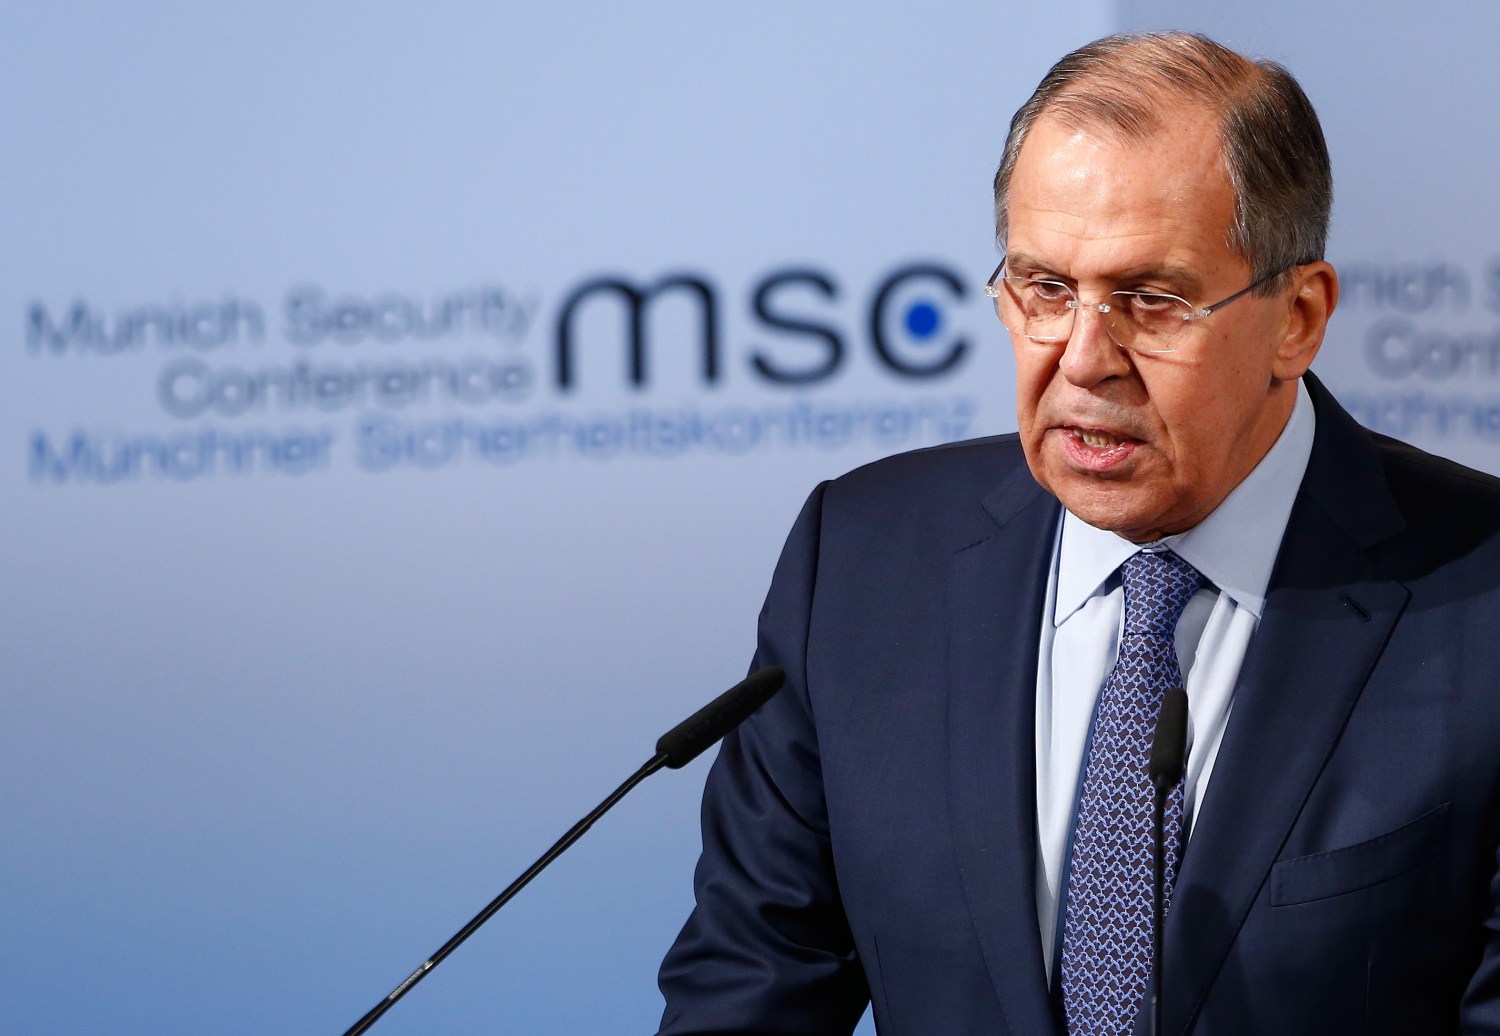 Russia's Foreign Minister Sergey Lavrov delivers his speech during the 53rd Munich Security Conference in Munich, Germany, February 18, 2017.    REUTERS/Michaela Rehle  - LR1ED2I0XLLD8